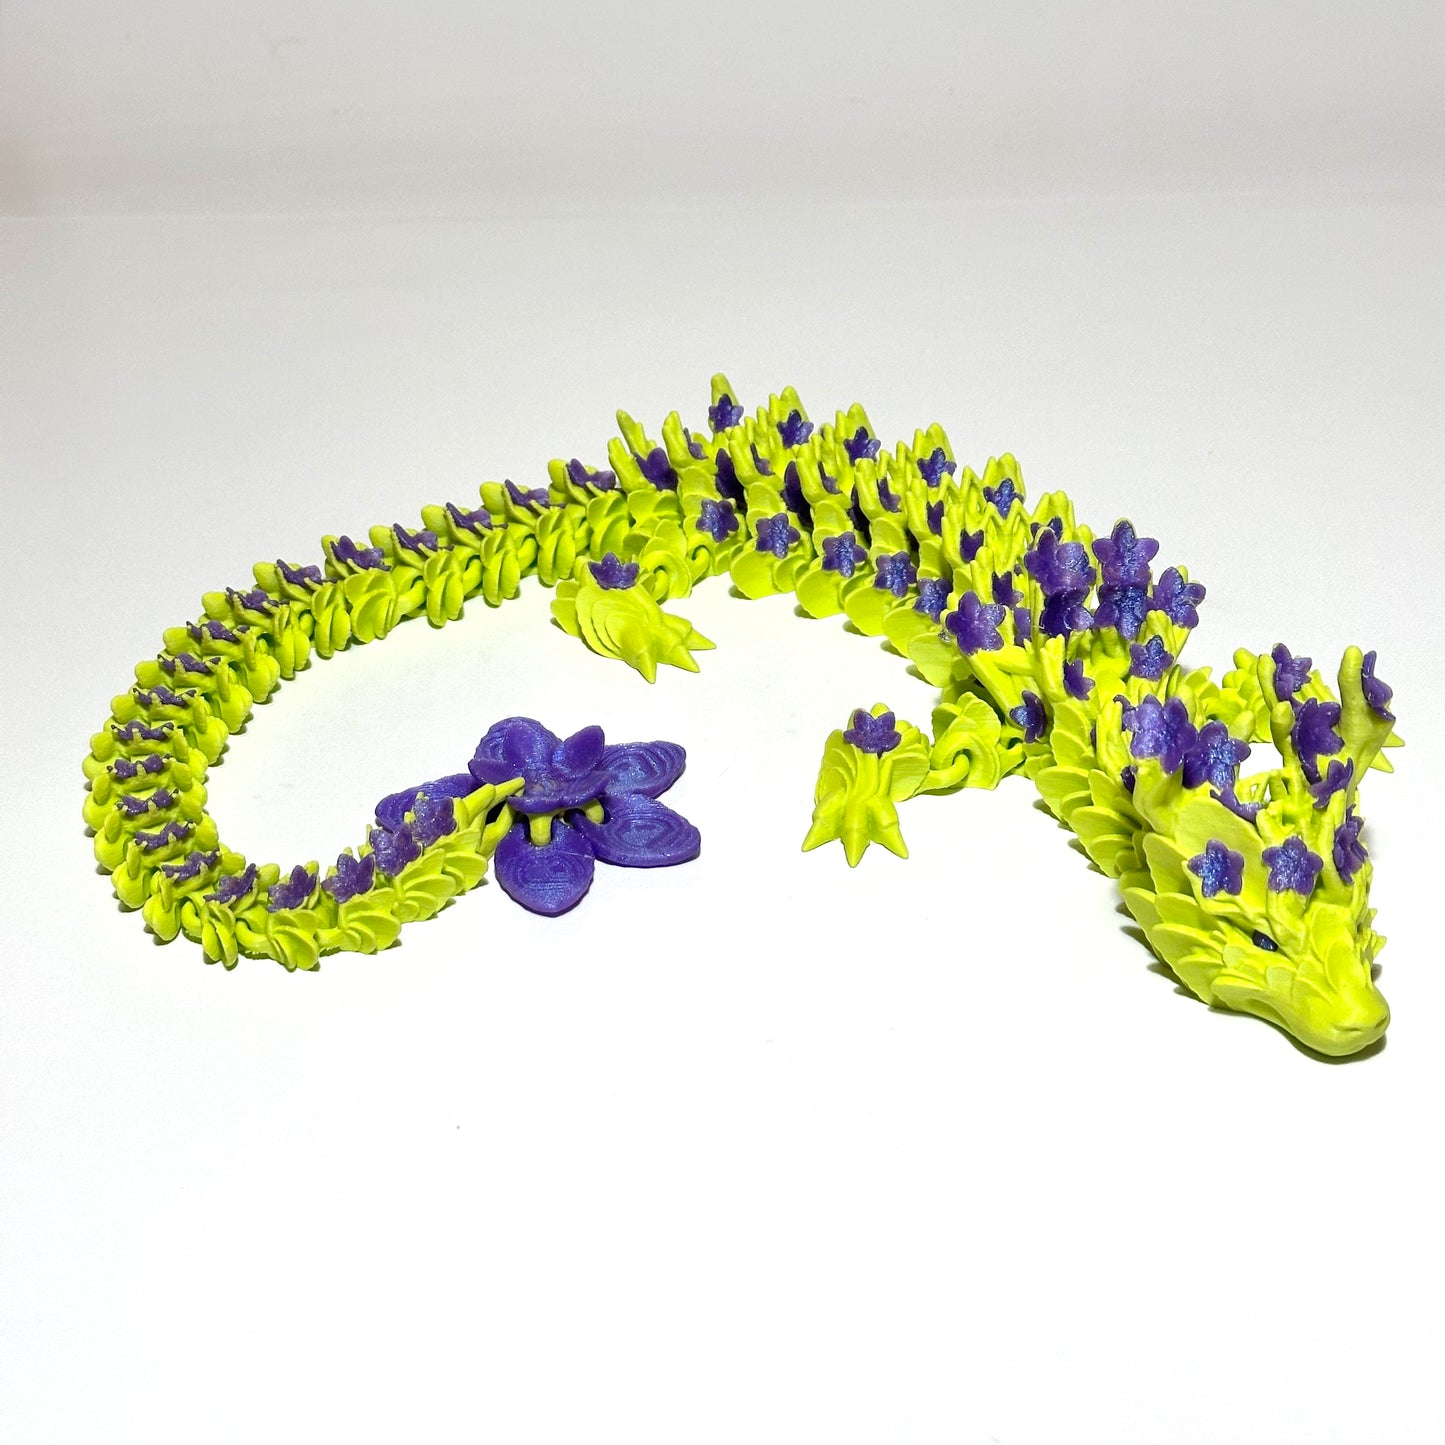 Large Cherry Blossom Dragon - 3D Printed Articulating Figure